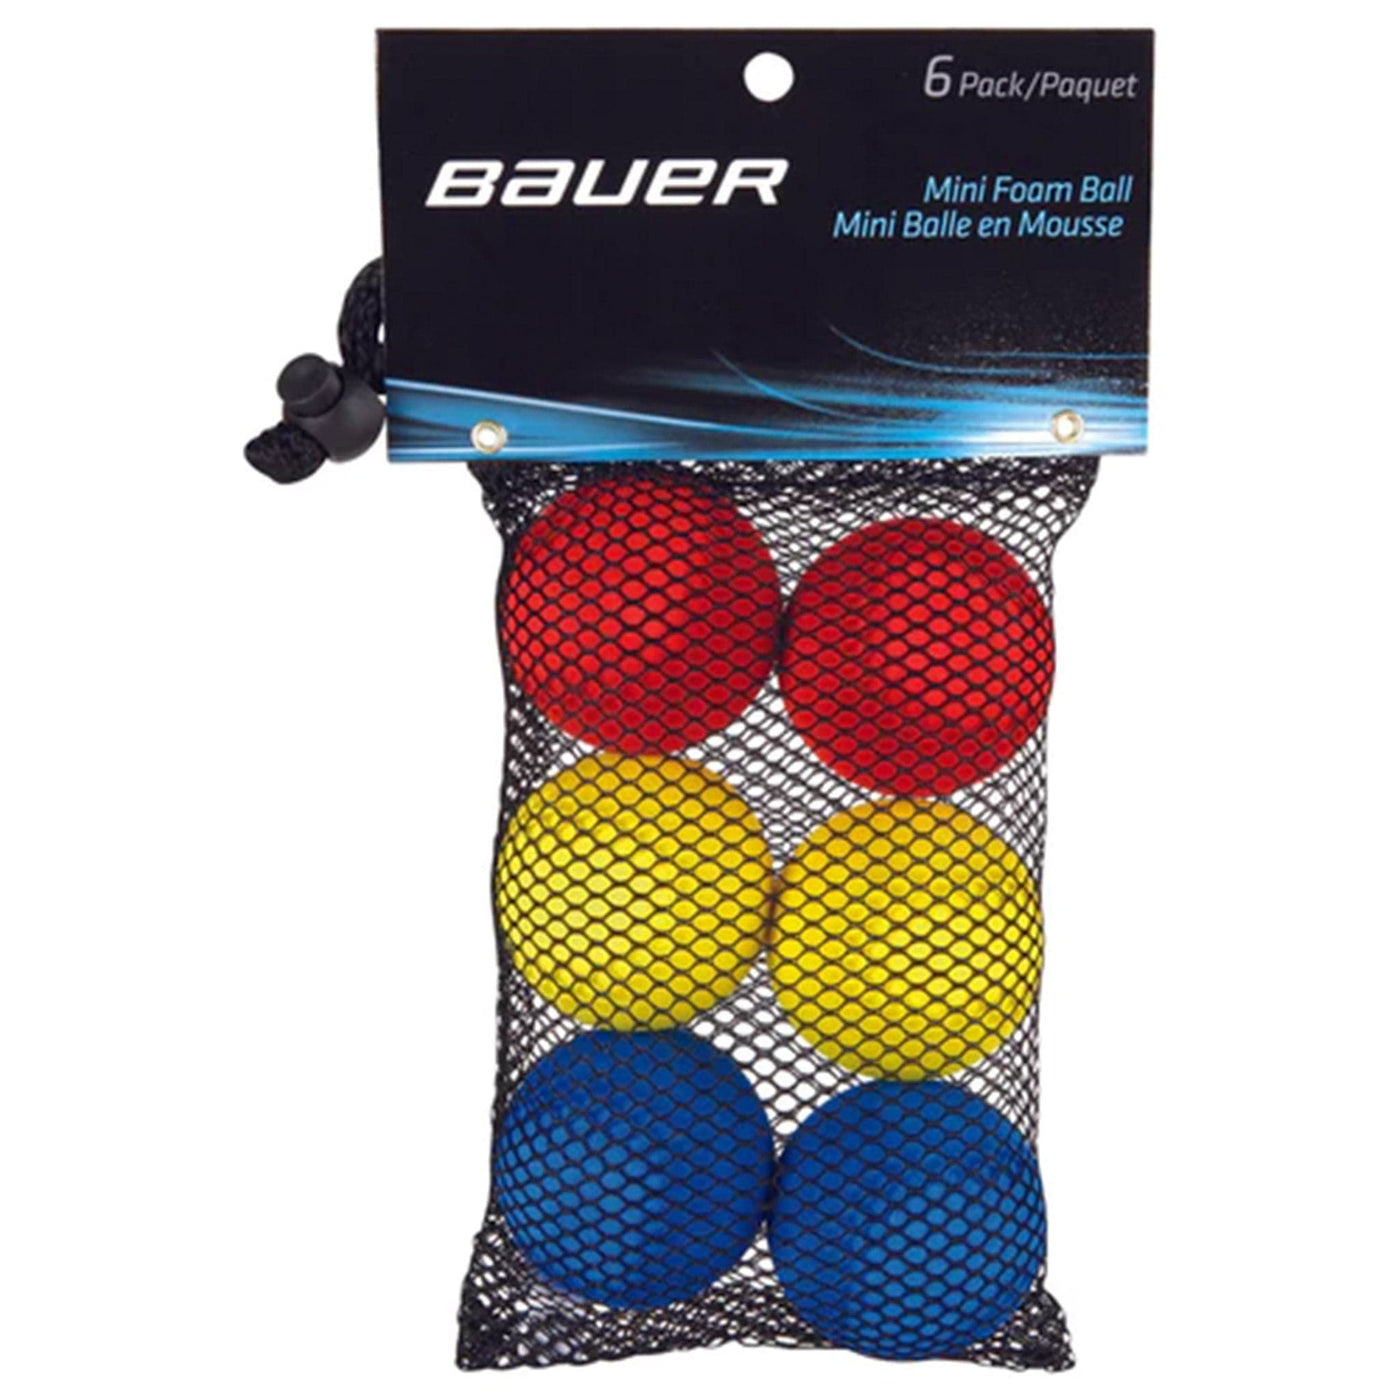 Bauer Mini Foam Ball - 6 Pack - The Hockey Shop Source For Sports